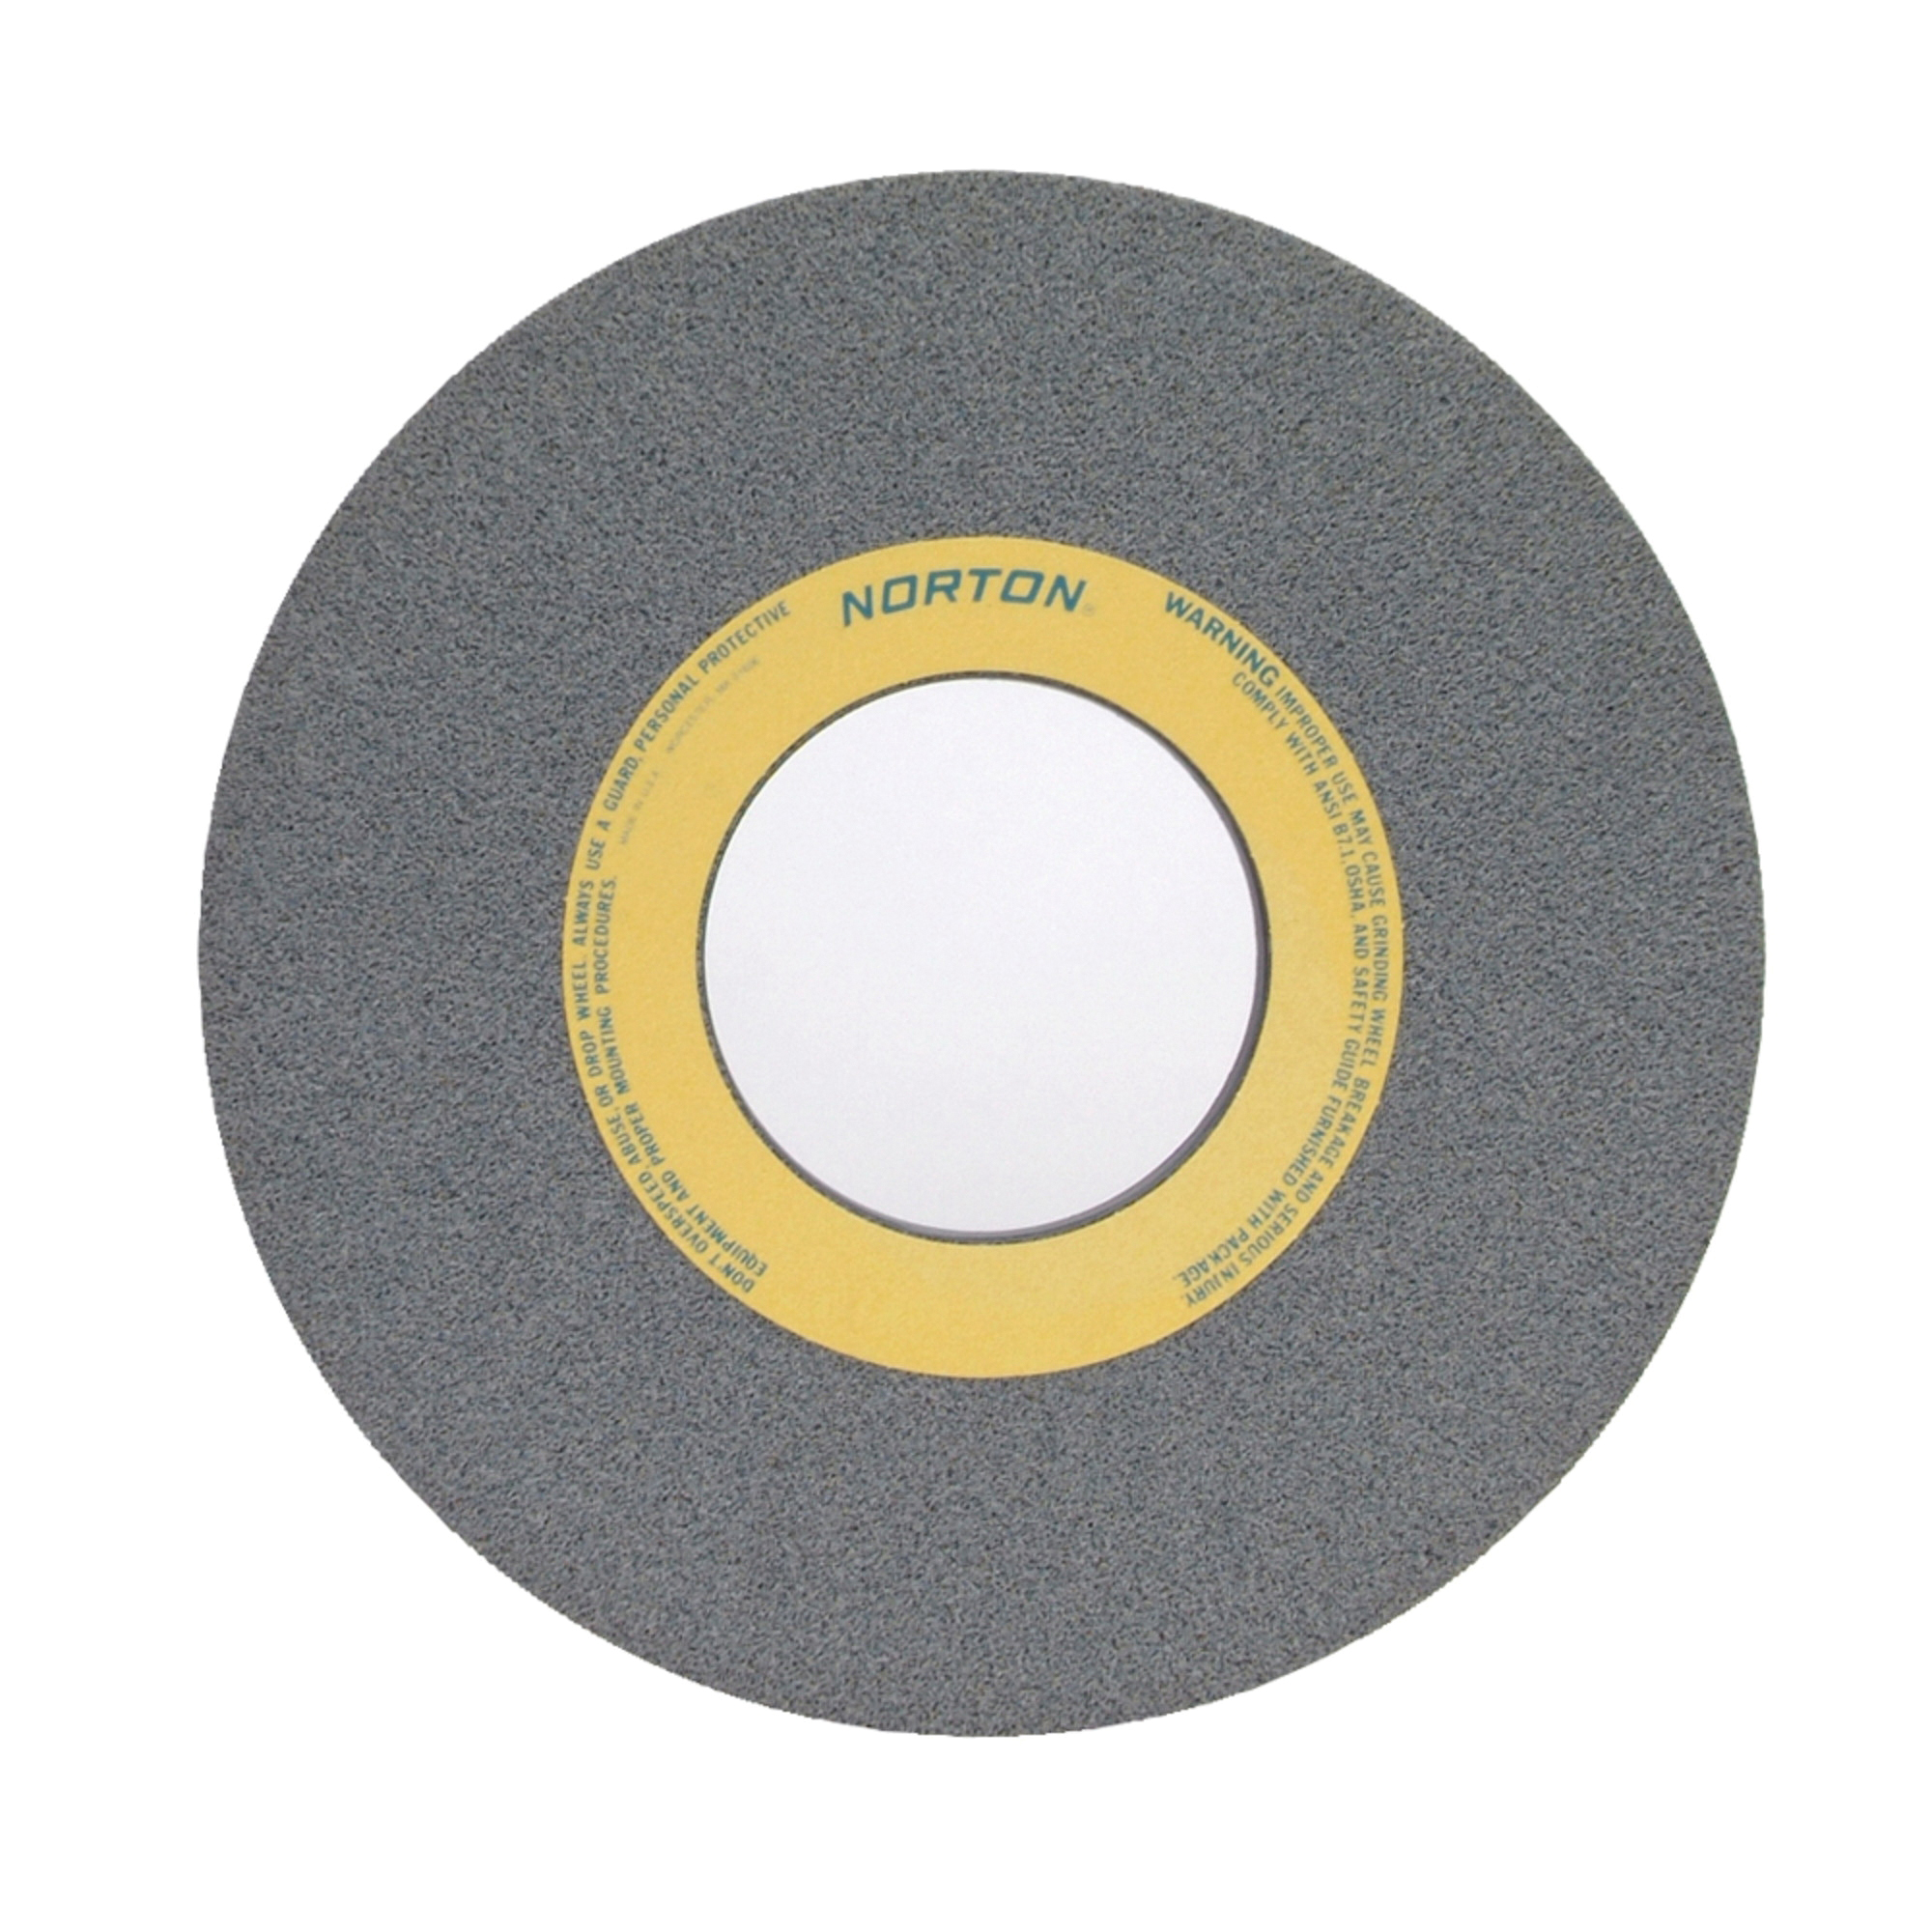 Norton® 66253364077 32A Straight Toolroom Wheel, 14 in Dia x 1 in THK, 5 in Center Hole, 60 Grit, Aluminum Oxide Abrasive